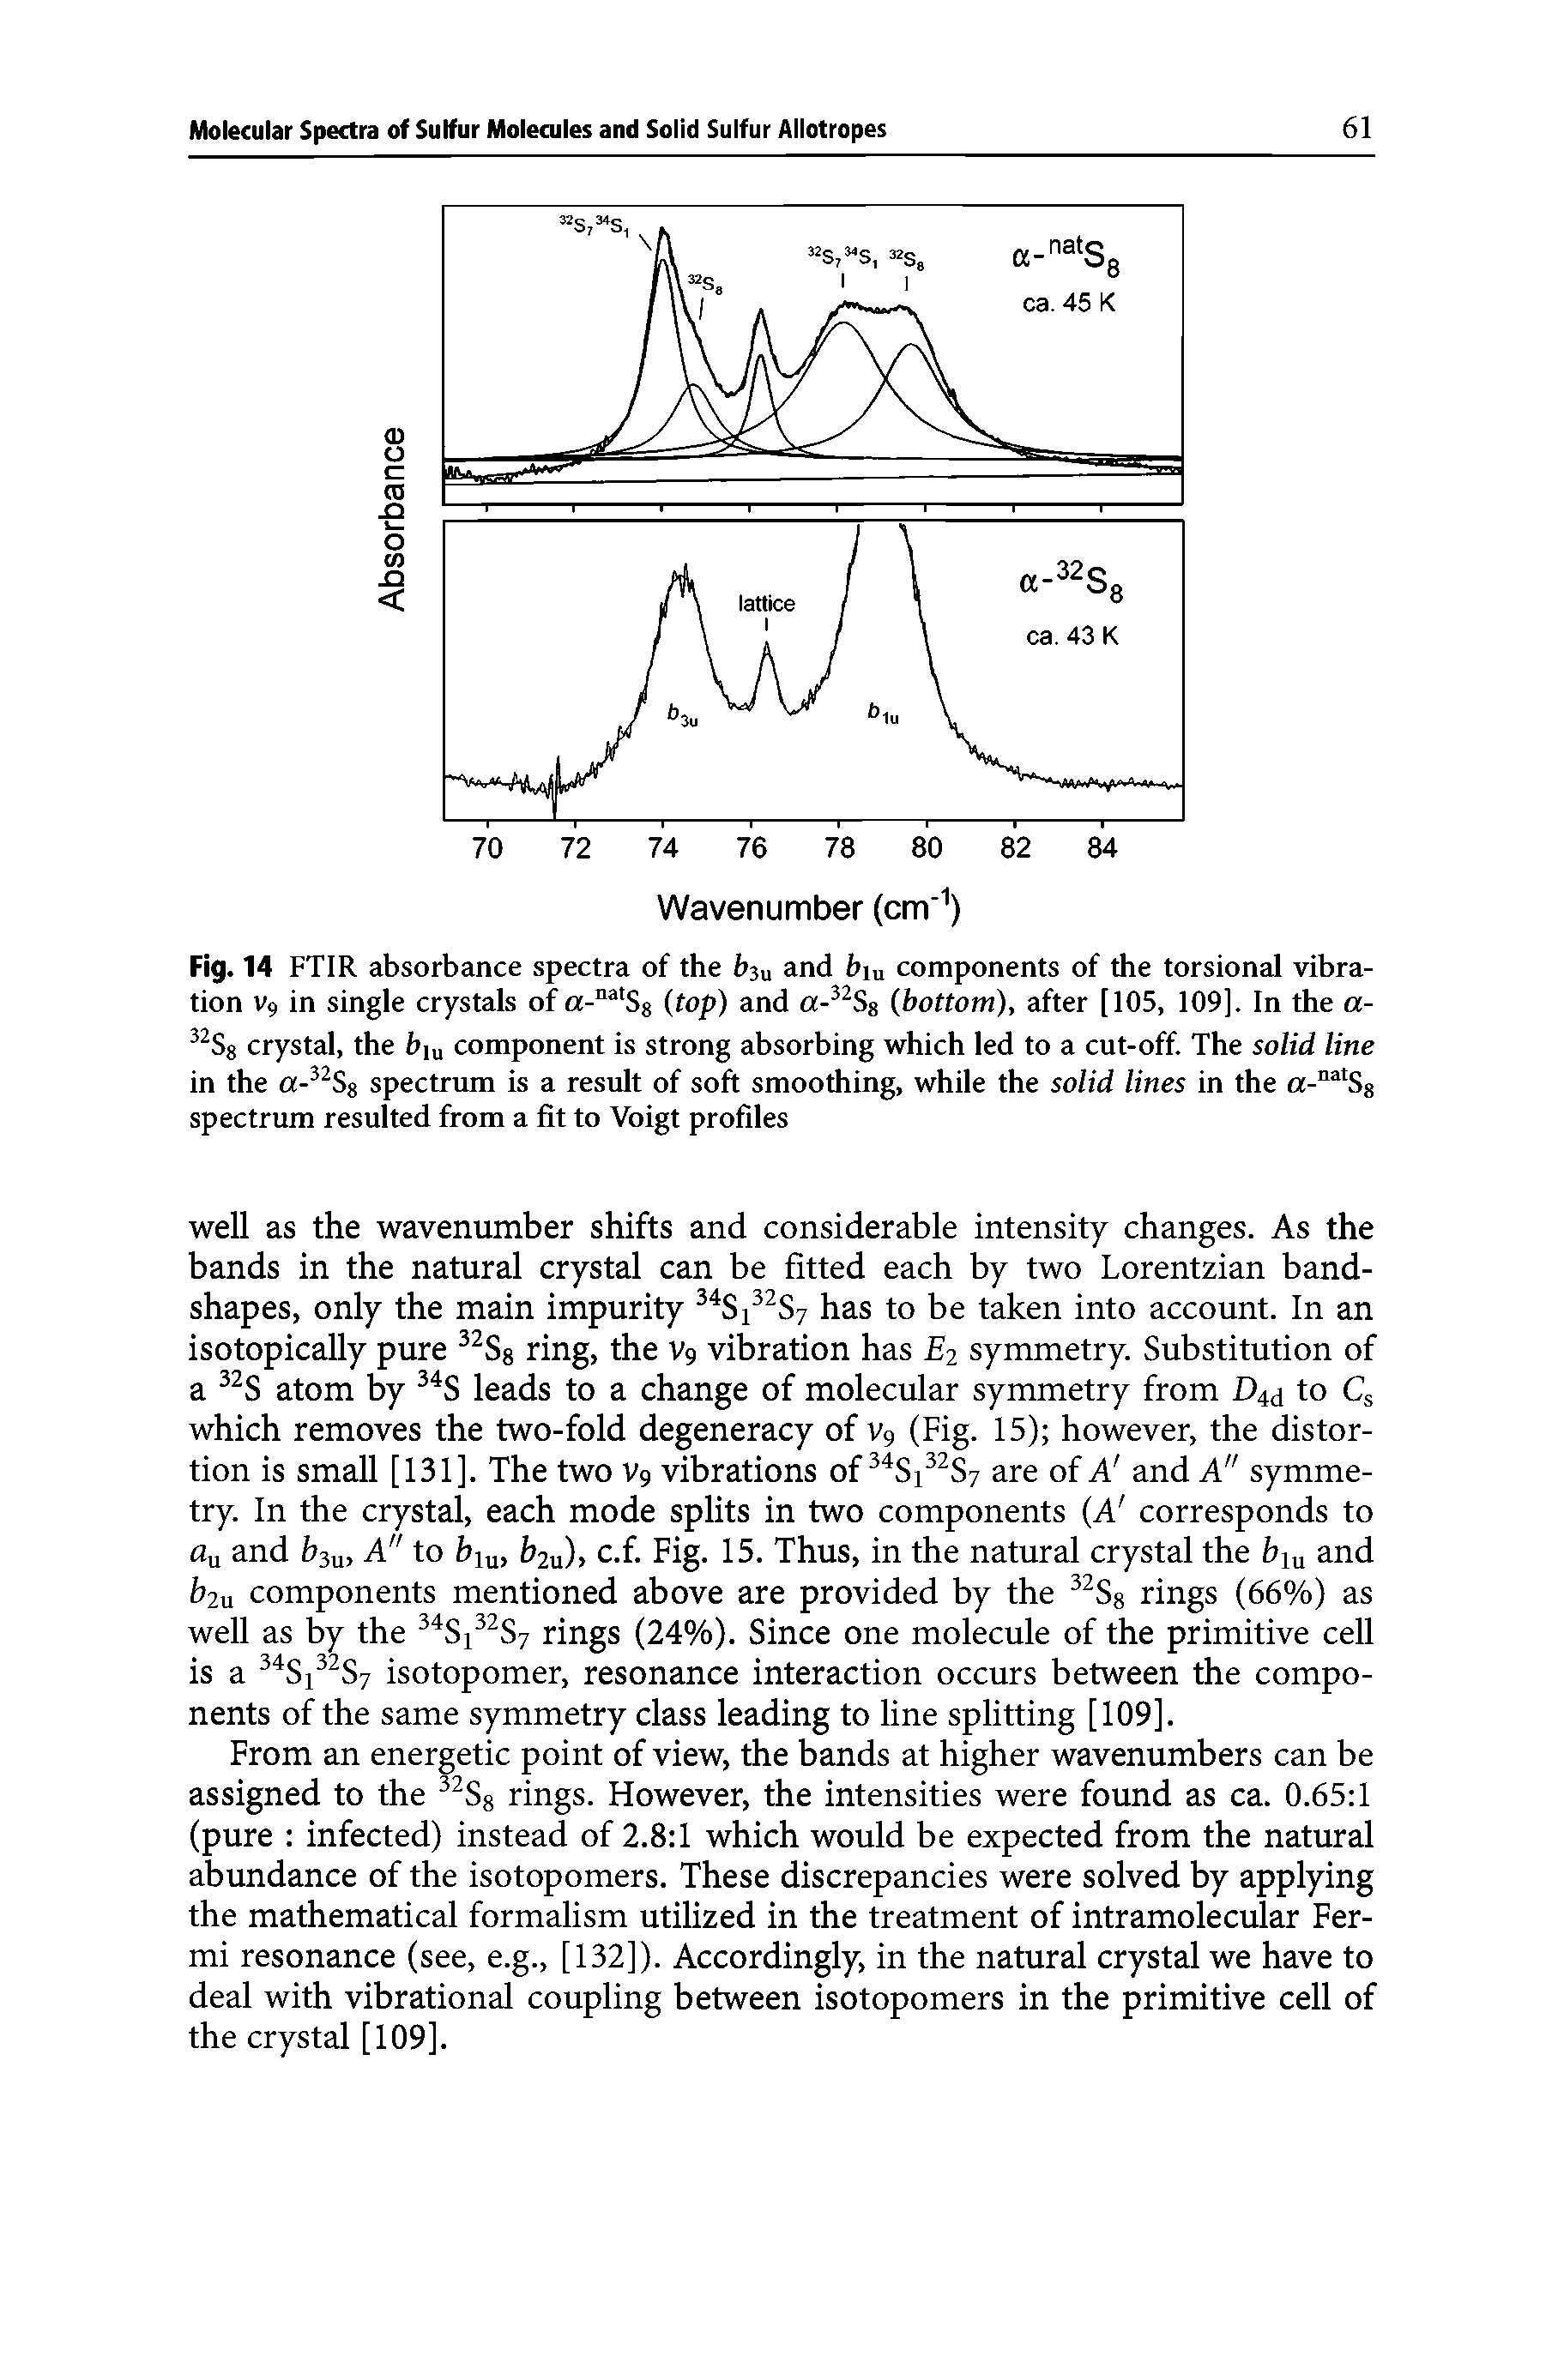 Fig. 14 FTIR absorbance spectra of the bsu and bin components of the torsional vibration V9 in single crystals of a- Sg (top) and a- Ss (bottom), after [105, 109], In the a- 8 crystal, the bin component is strong absorbing which led to a cut-off. The solid line in the spectrum is a result of soft smoothing, while the solid lines in the a- S8...